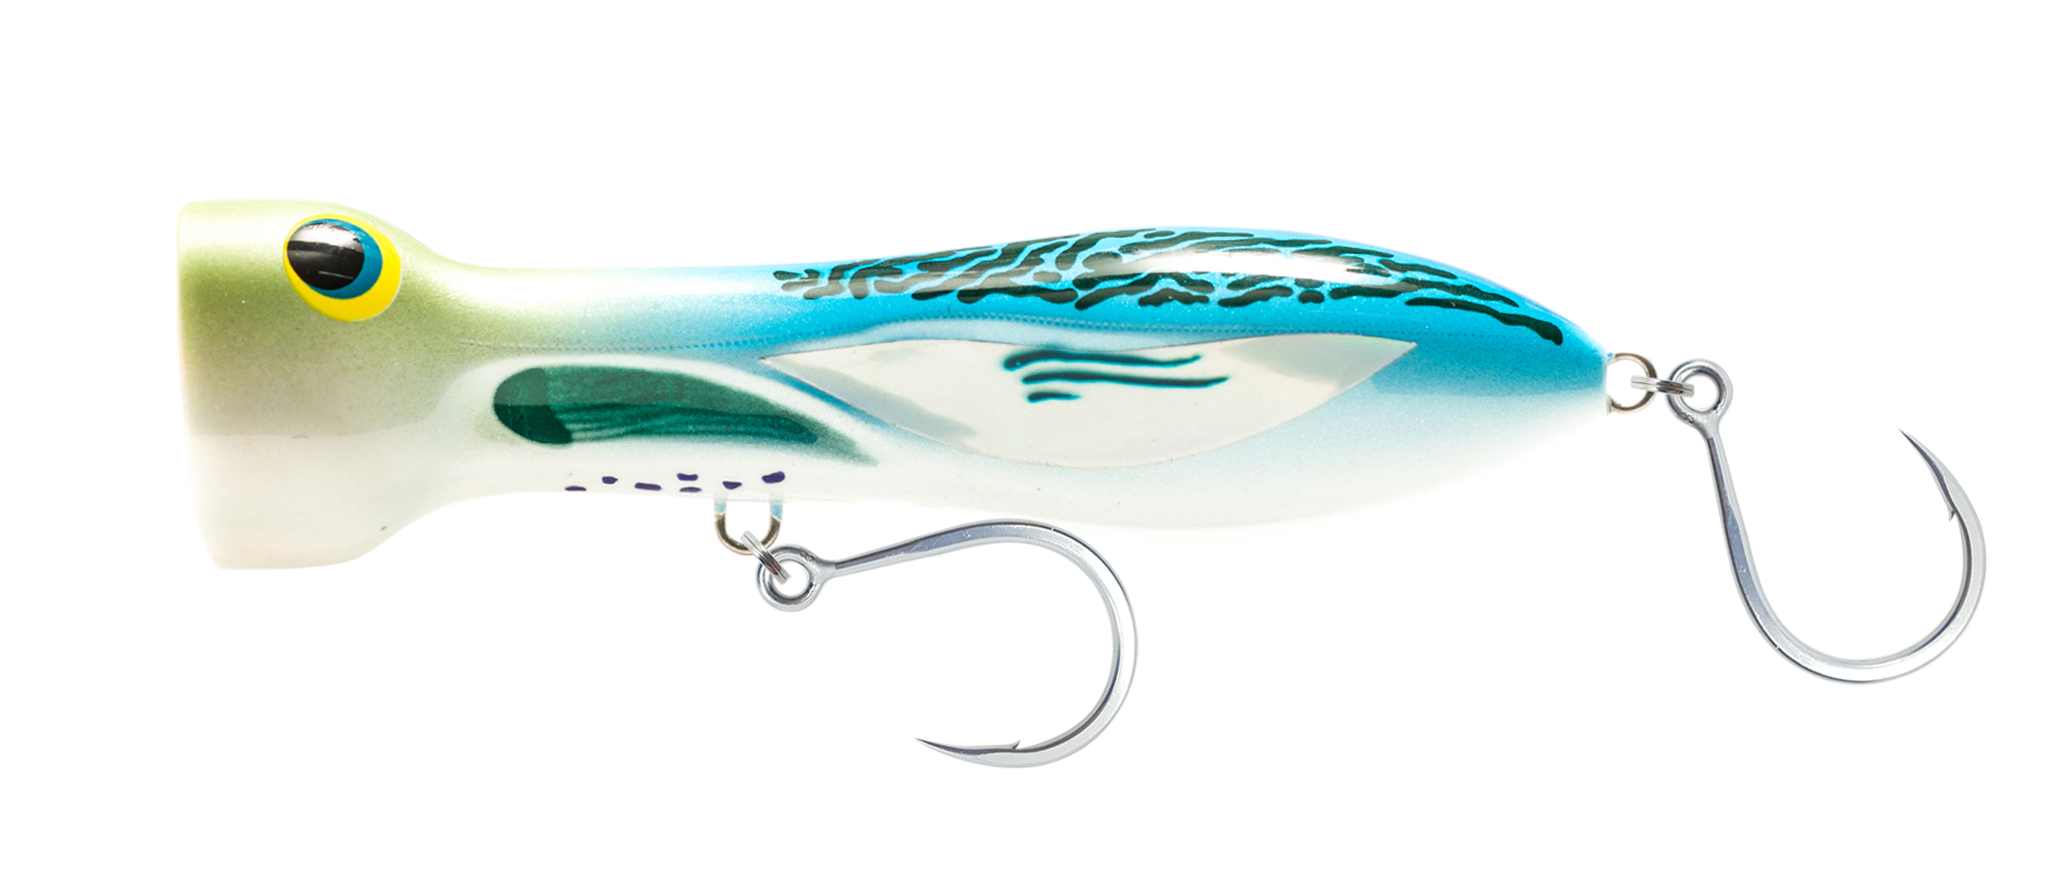 Nomad Design Chug Norris Saltwater/Bluewater Popper Bass Fishing